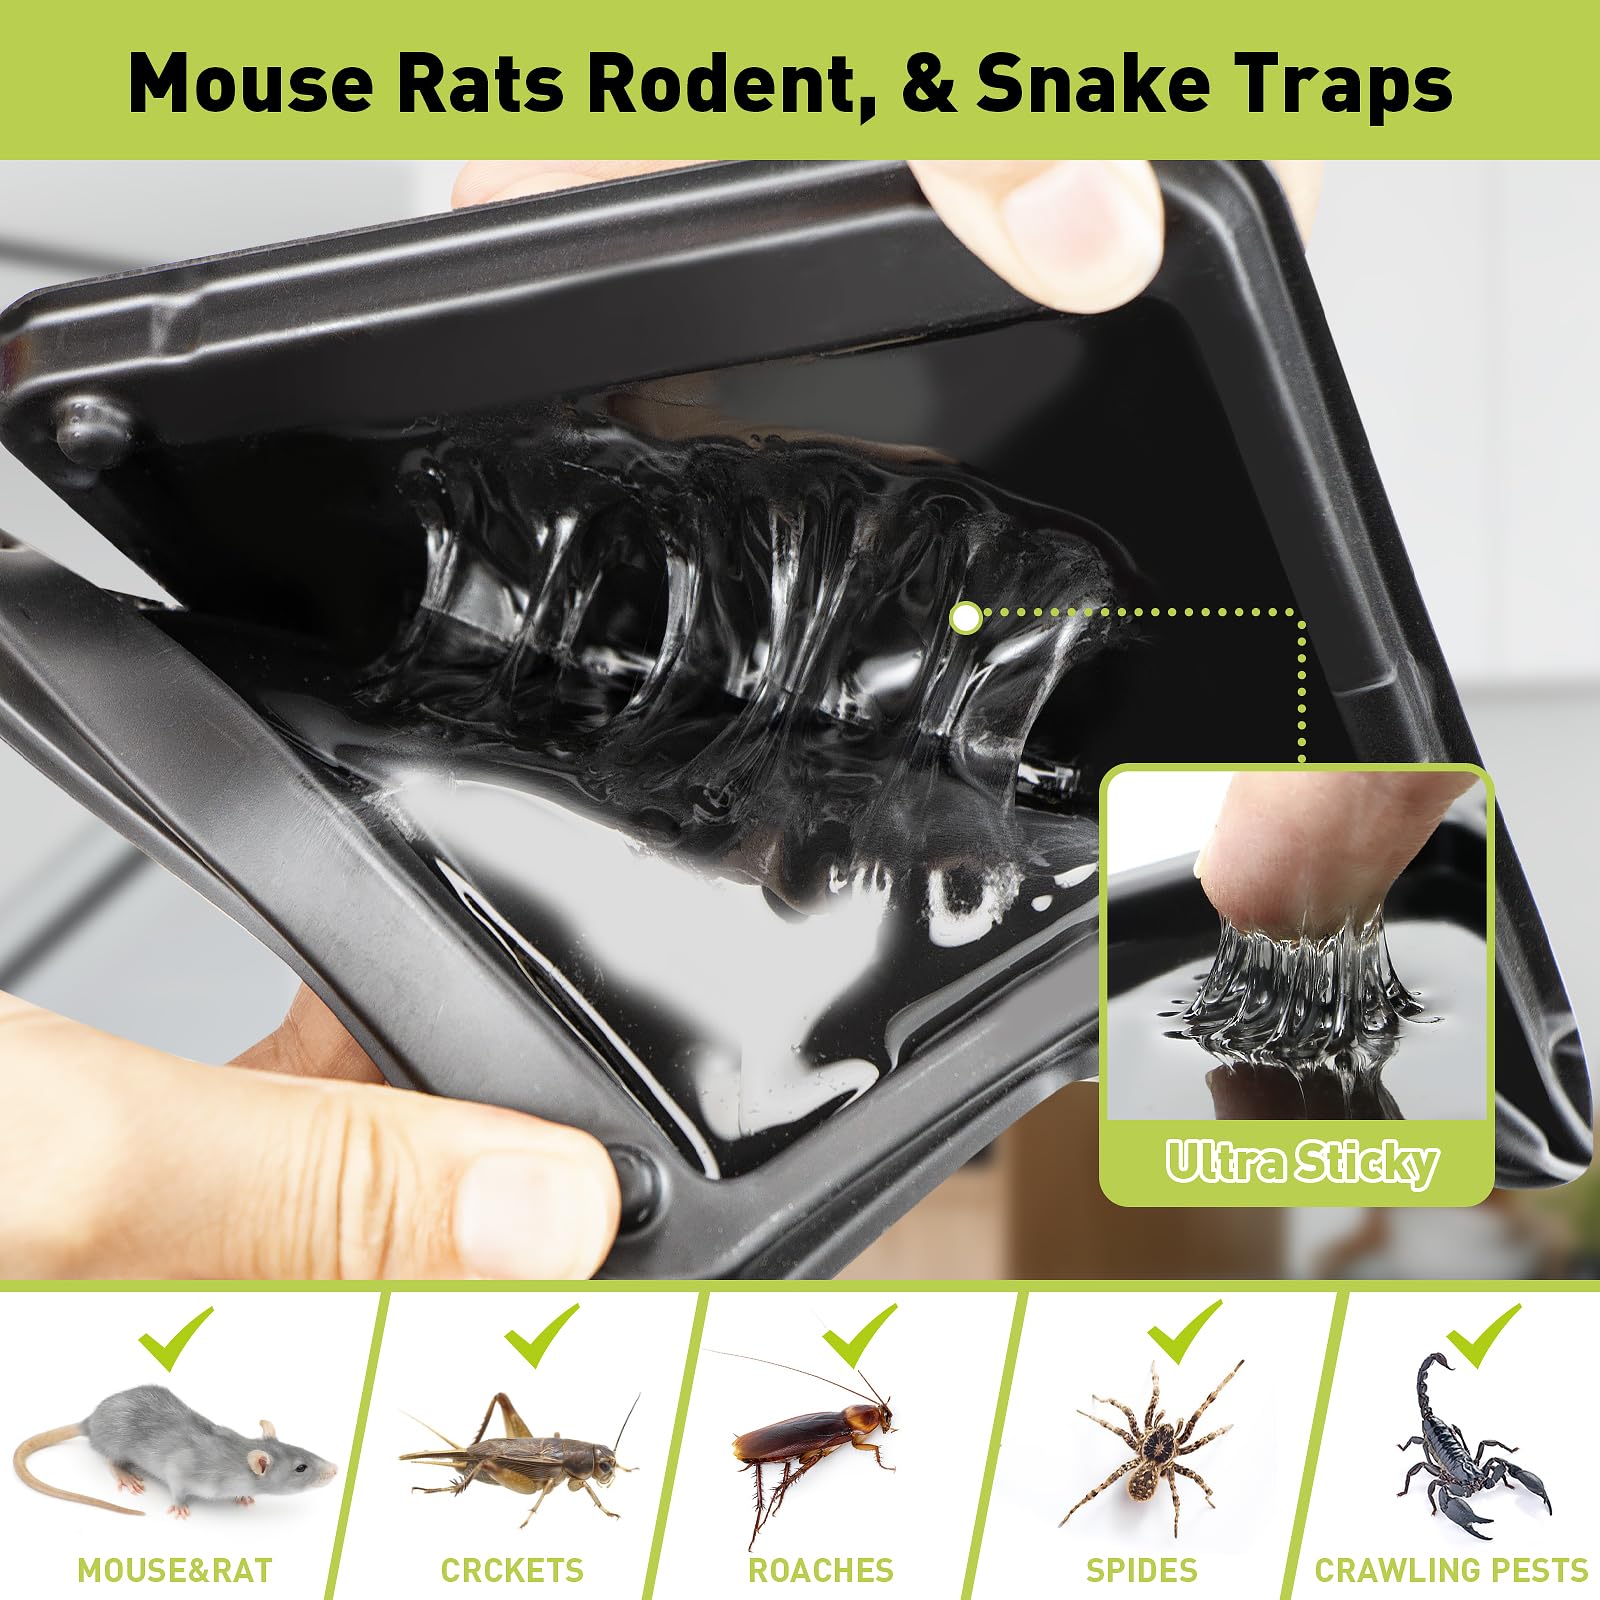 PELRAYT Super Glue Mouse Traps Indoor, Rat Trap 12pk, Glue Traps for Mice and Rats : Super Heavy-Duty, Larger Sticky Traps for Mouse & Snakes - Non-Toxic, Safe for Children & Pets, Easy to Set